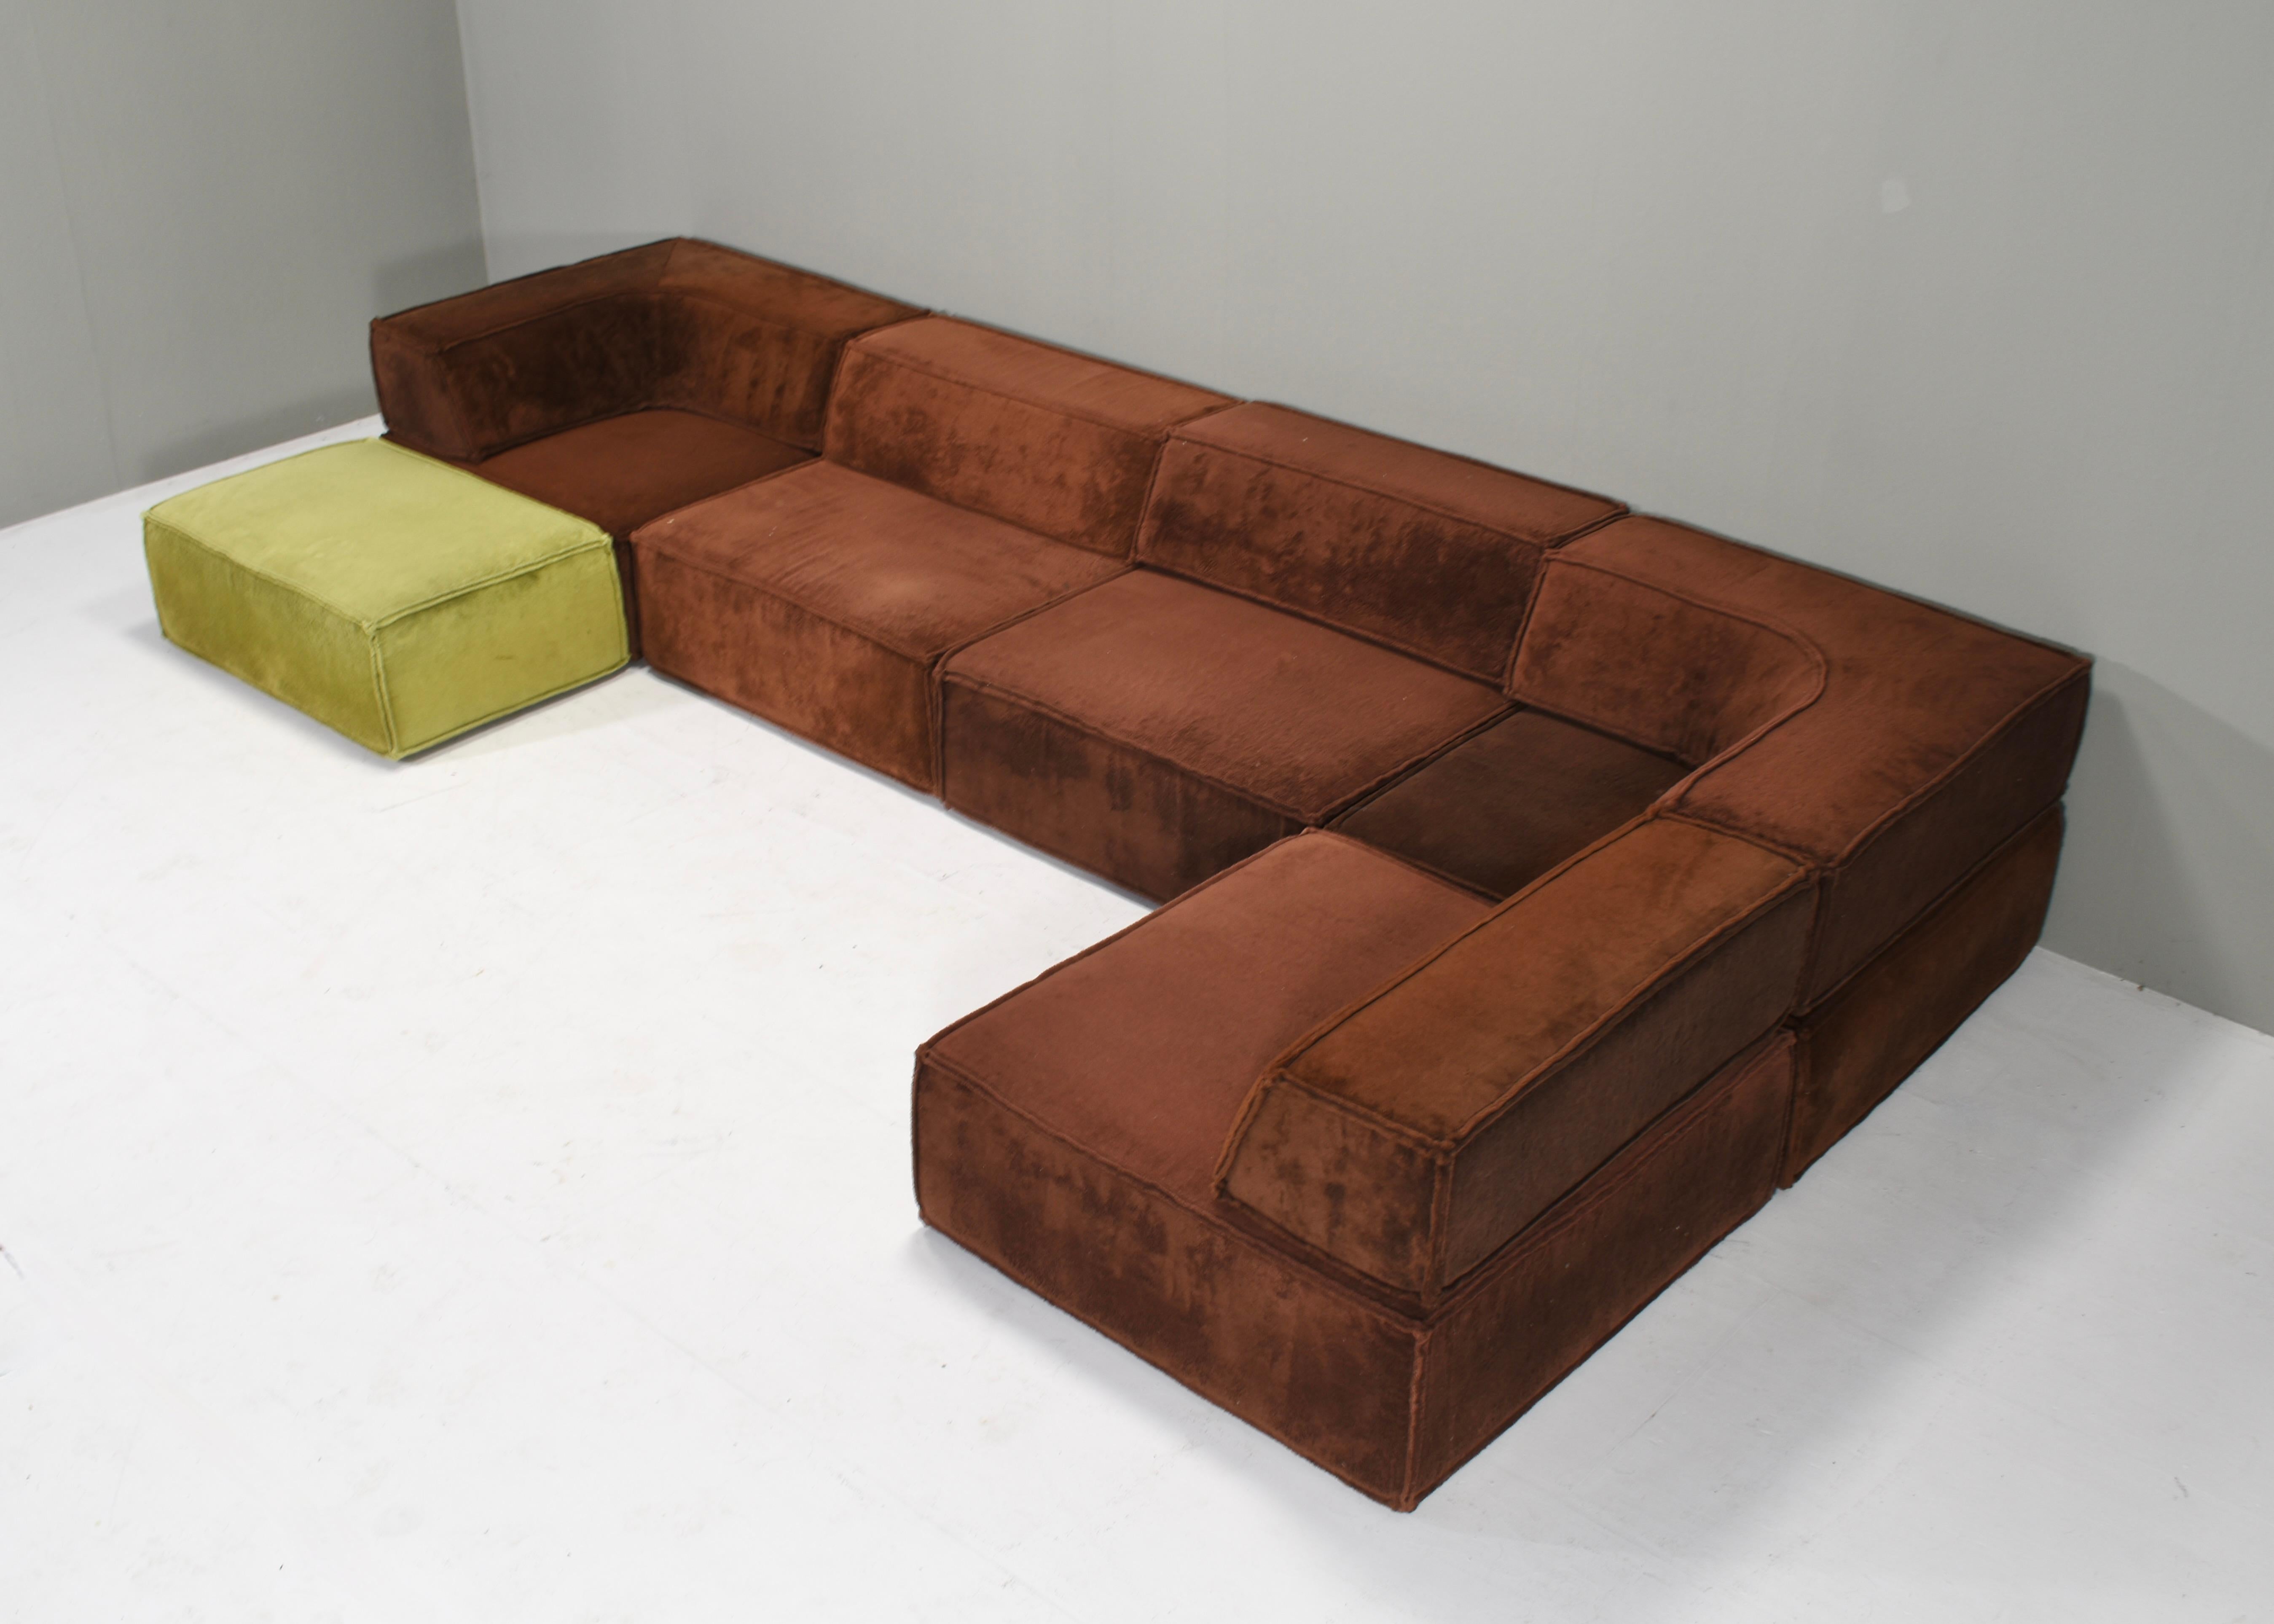 Sectional landscape sofa designed by the Swiss Designers Group named Form AG and produced in the 1970s by COR, Germany.
NEEDS NEW UPHOLSTERY. Ask us about the possibilities.
New upholstery and new fabric are not included in the price.

Many